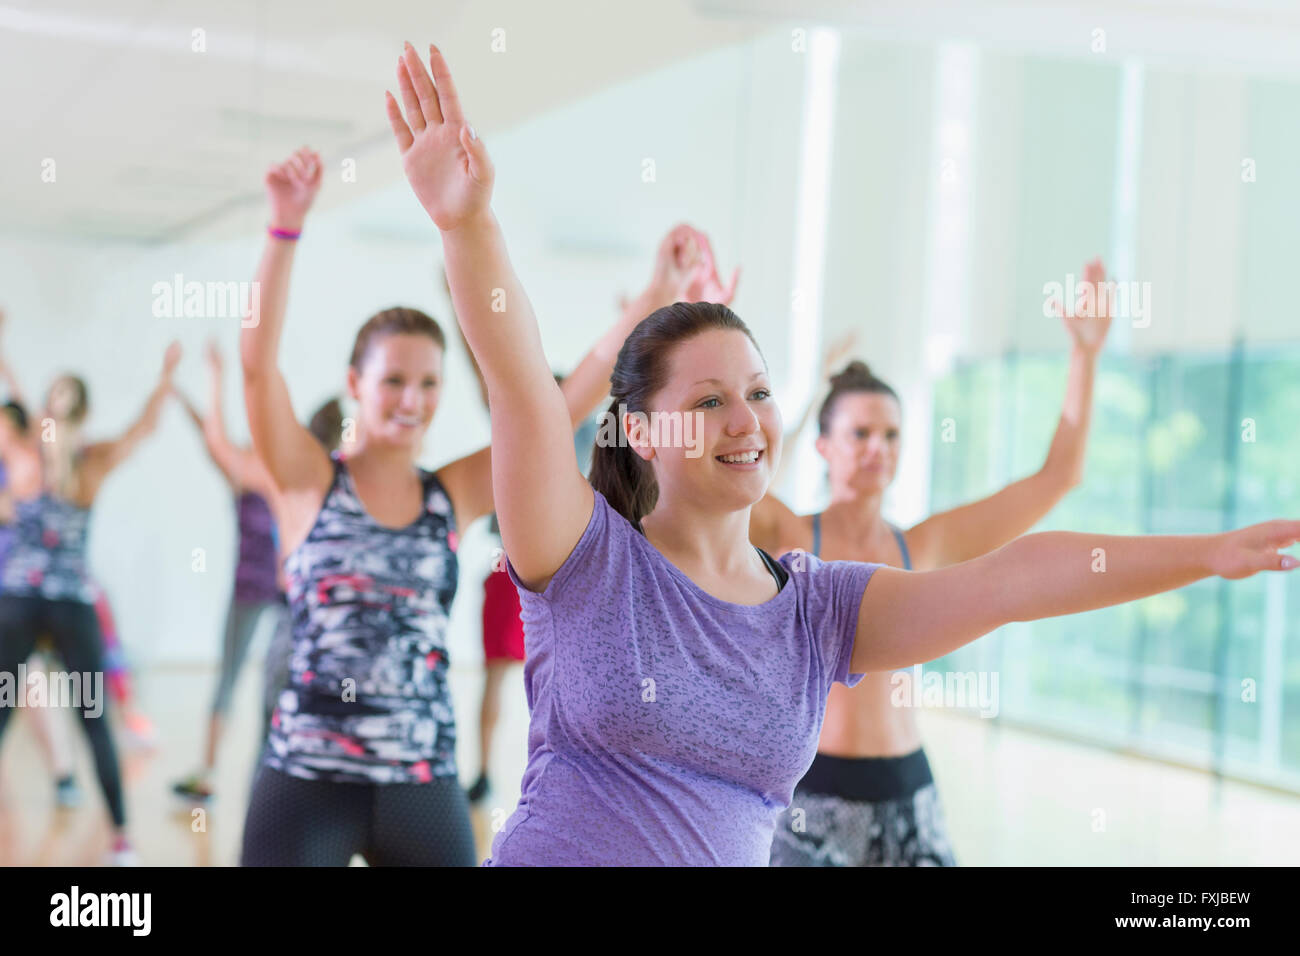 Smiling woman with arms raised in exercise class Stock Photo